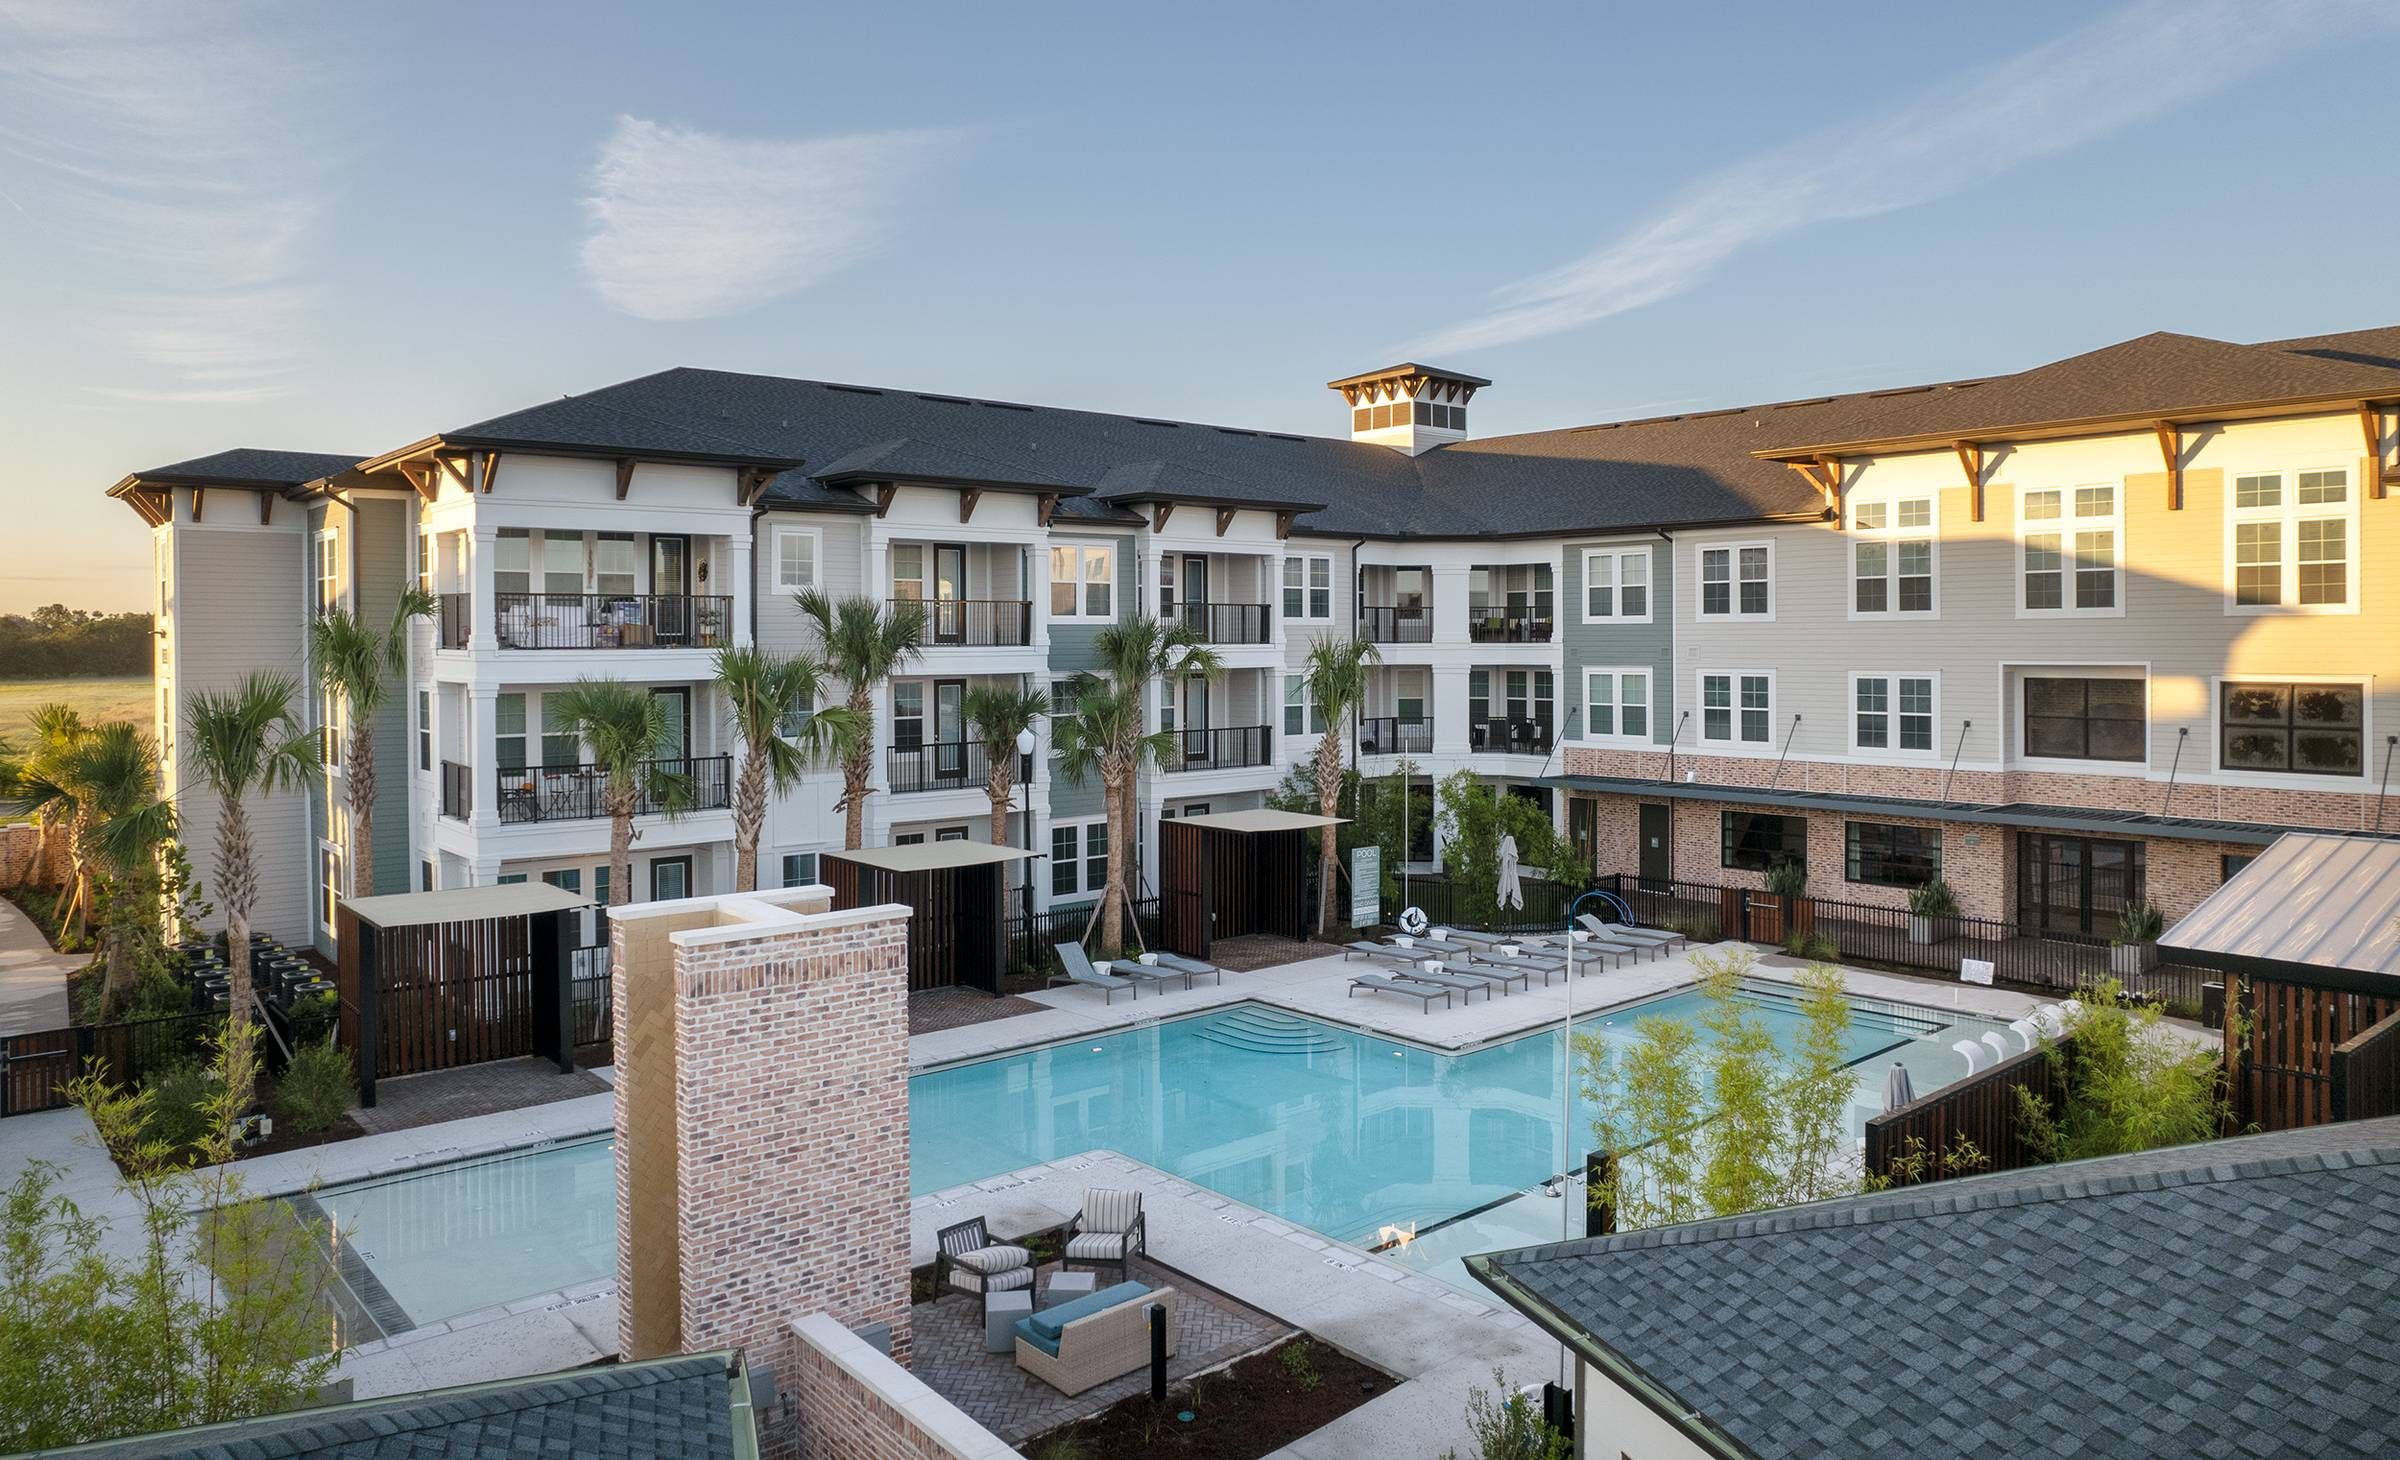 Sunrise view of Alta Winter Garden's elegant pool deck and loungers, nestled among modern apartment buildings.